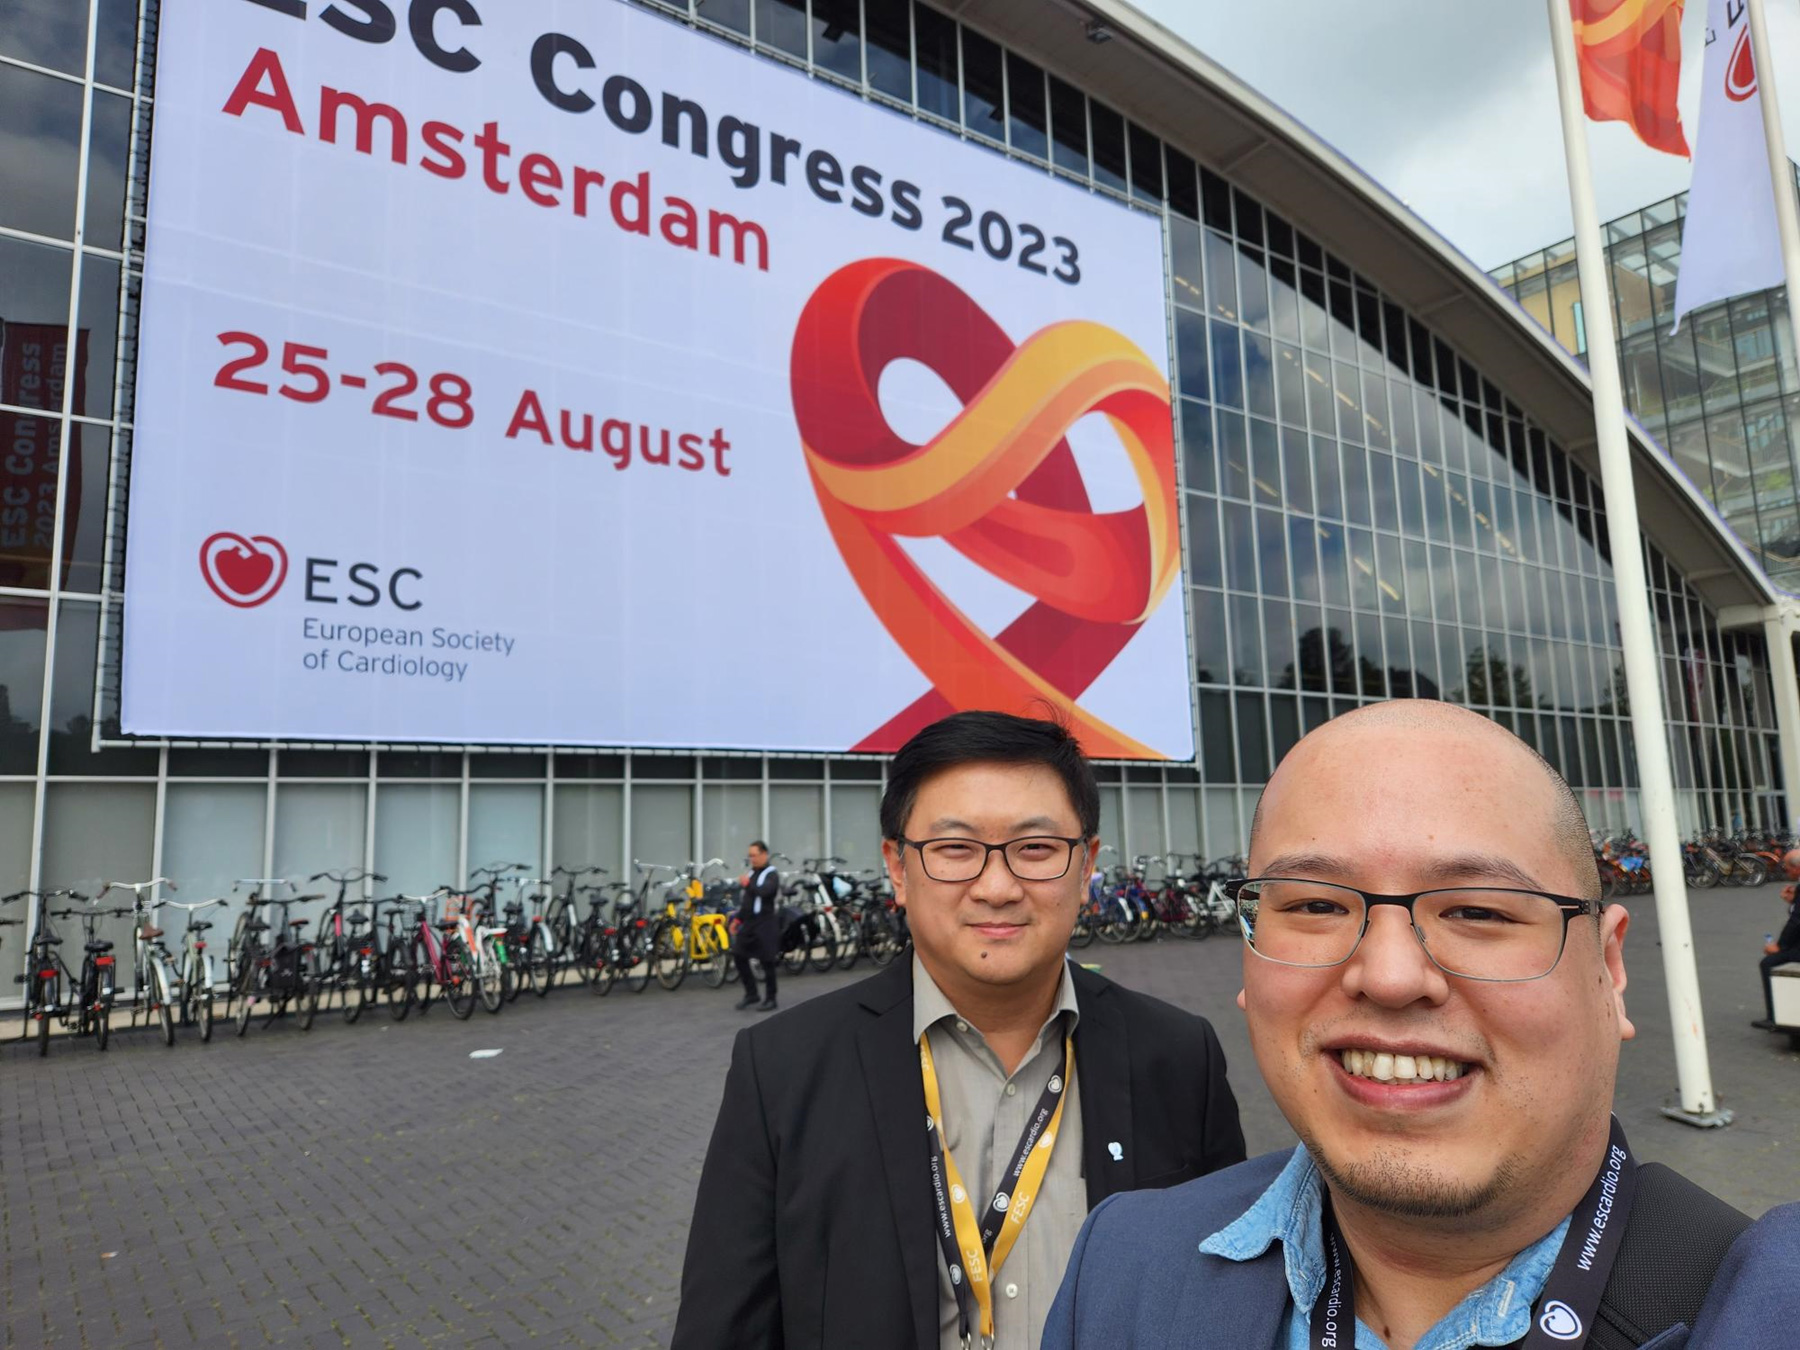 (From left) Professor Patrick Then and Dr Brian Loh at the European Society of Cardiology Congress 2023.